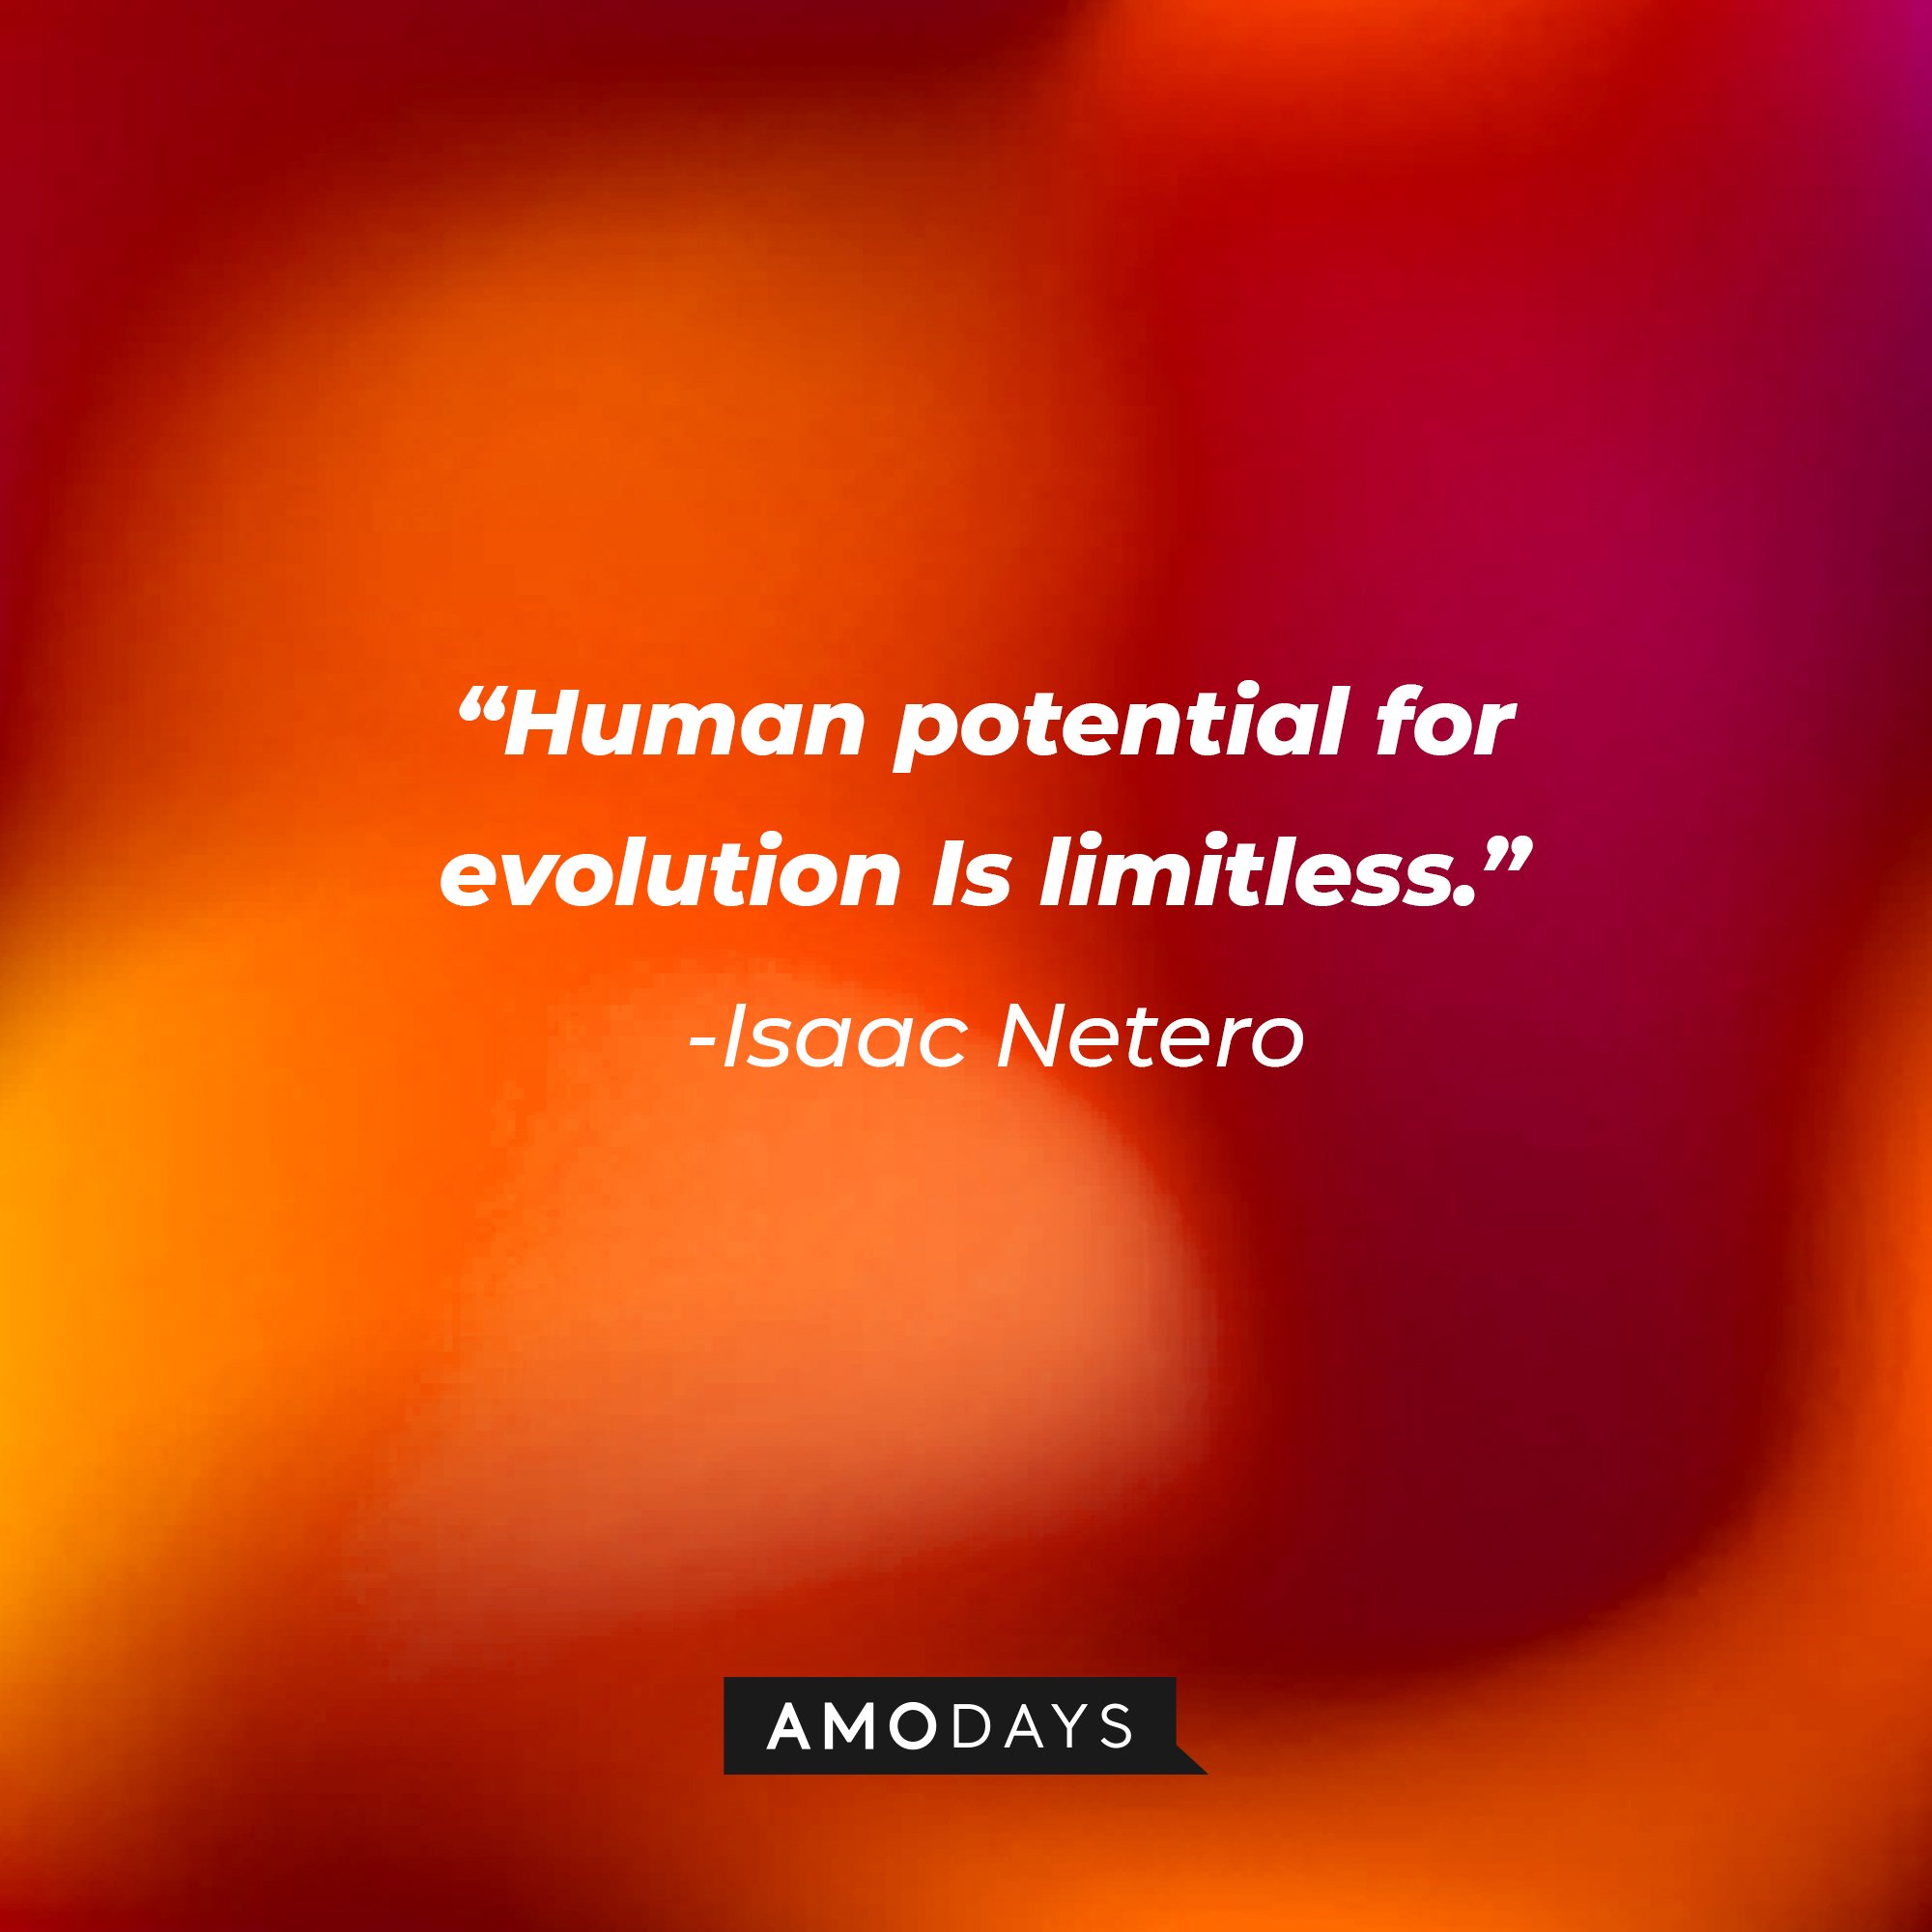 Isaac Netero’s quote: "Human potential for evolution Is limitless."  | Image: AmoDays